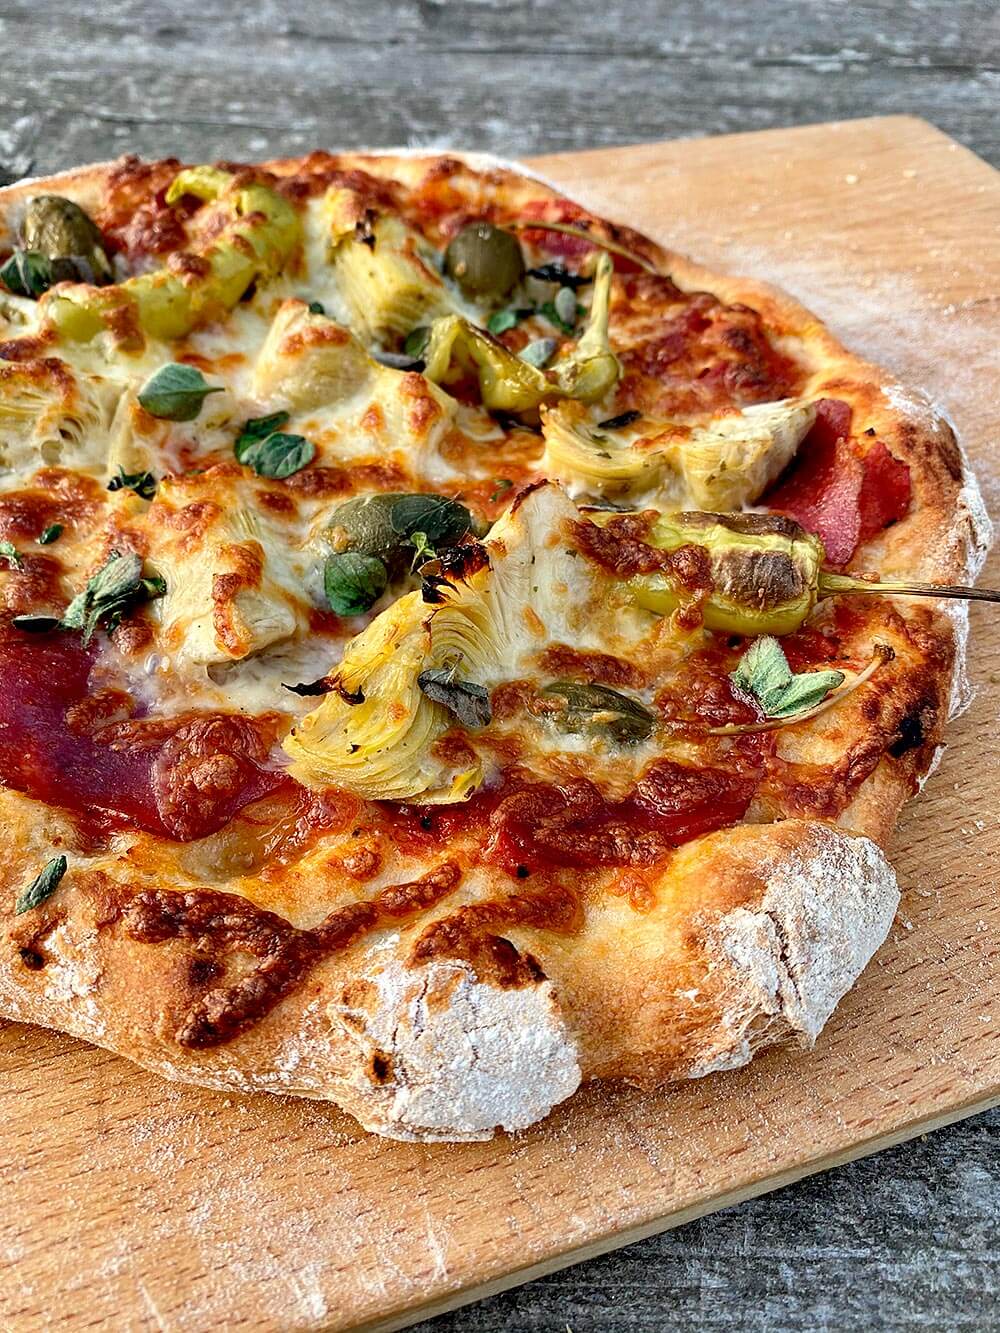 My personal variant of the Capricciosa is the Pizza Rolf with San Marzano tomatoes, salami, artichokes, apple capers, pepperoncini, yellow peppers, mozzarella and oregano. Make your own pizza dough.